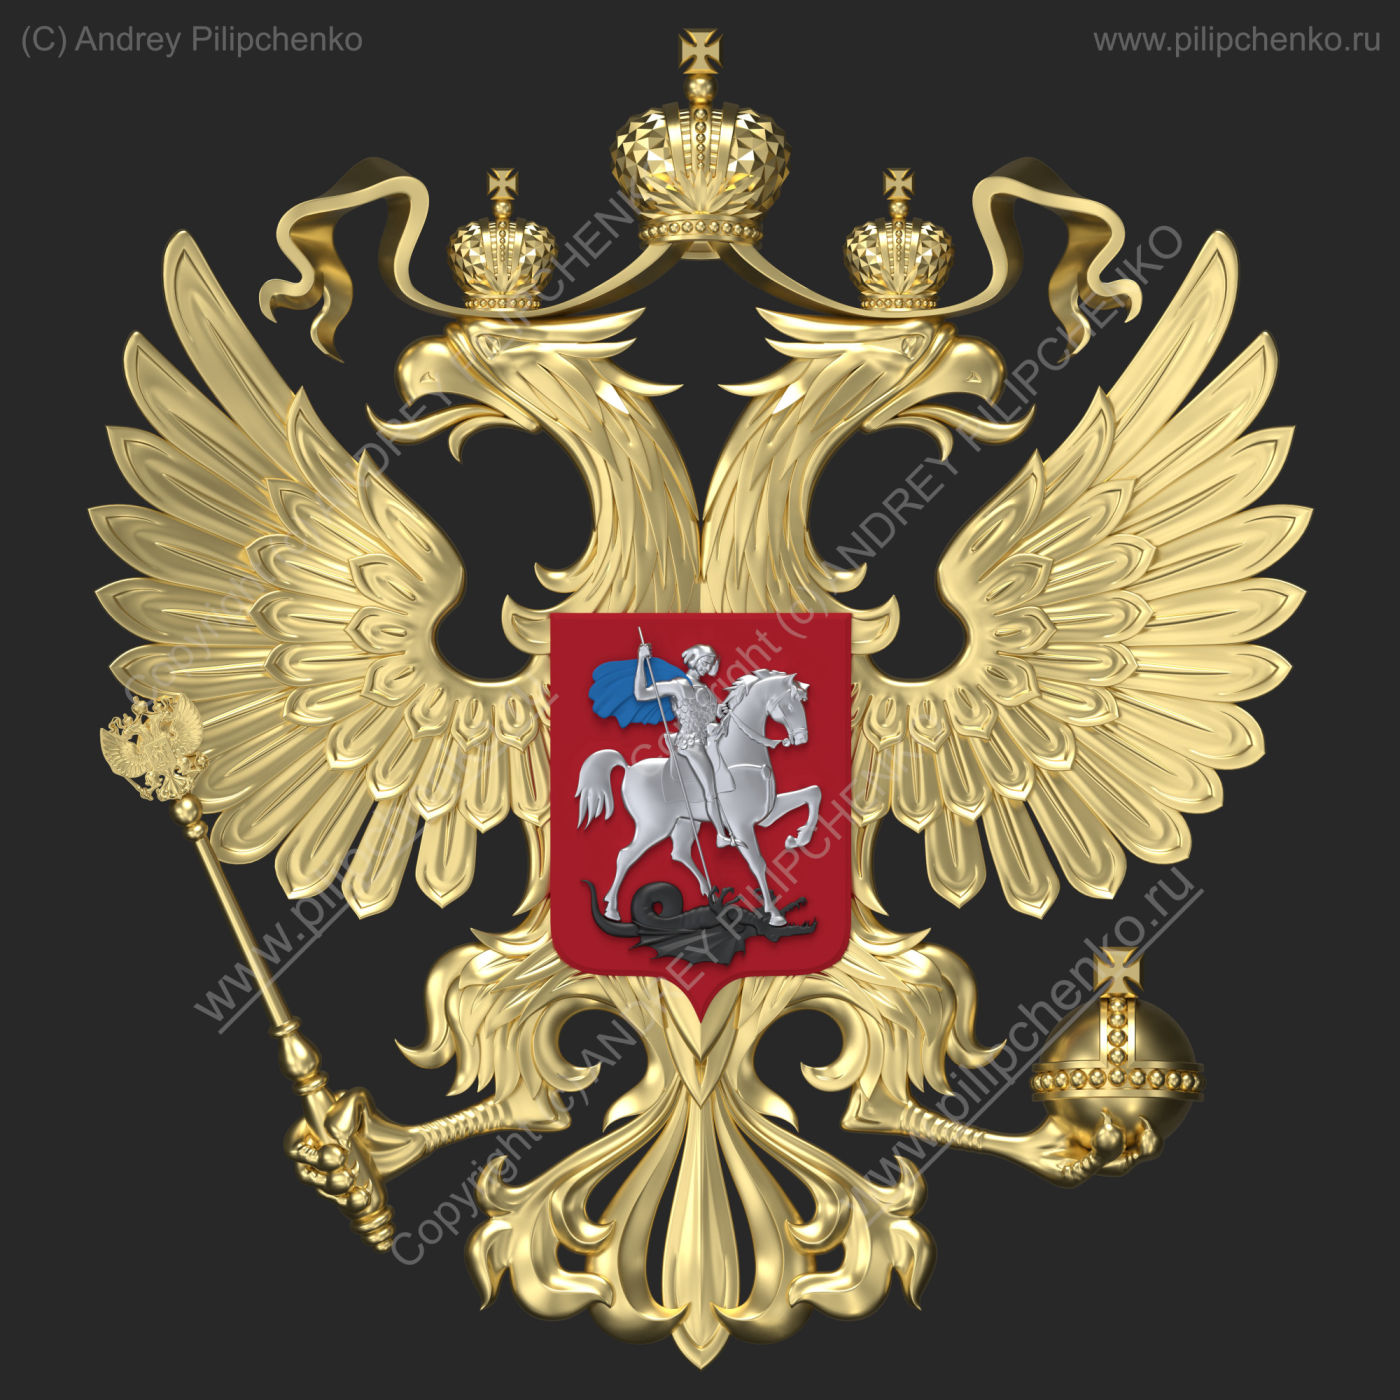 High resolution image of coat of arms of Russia